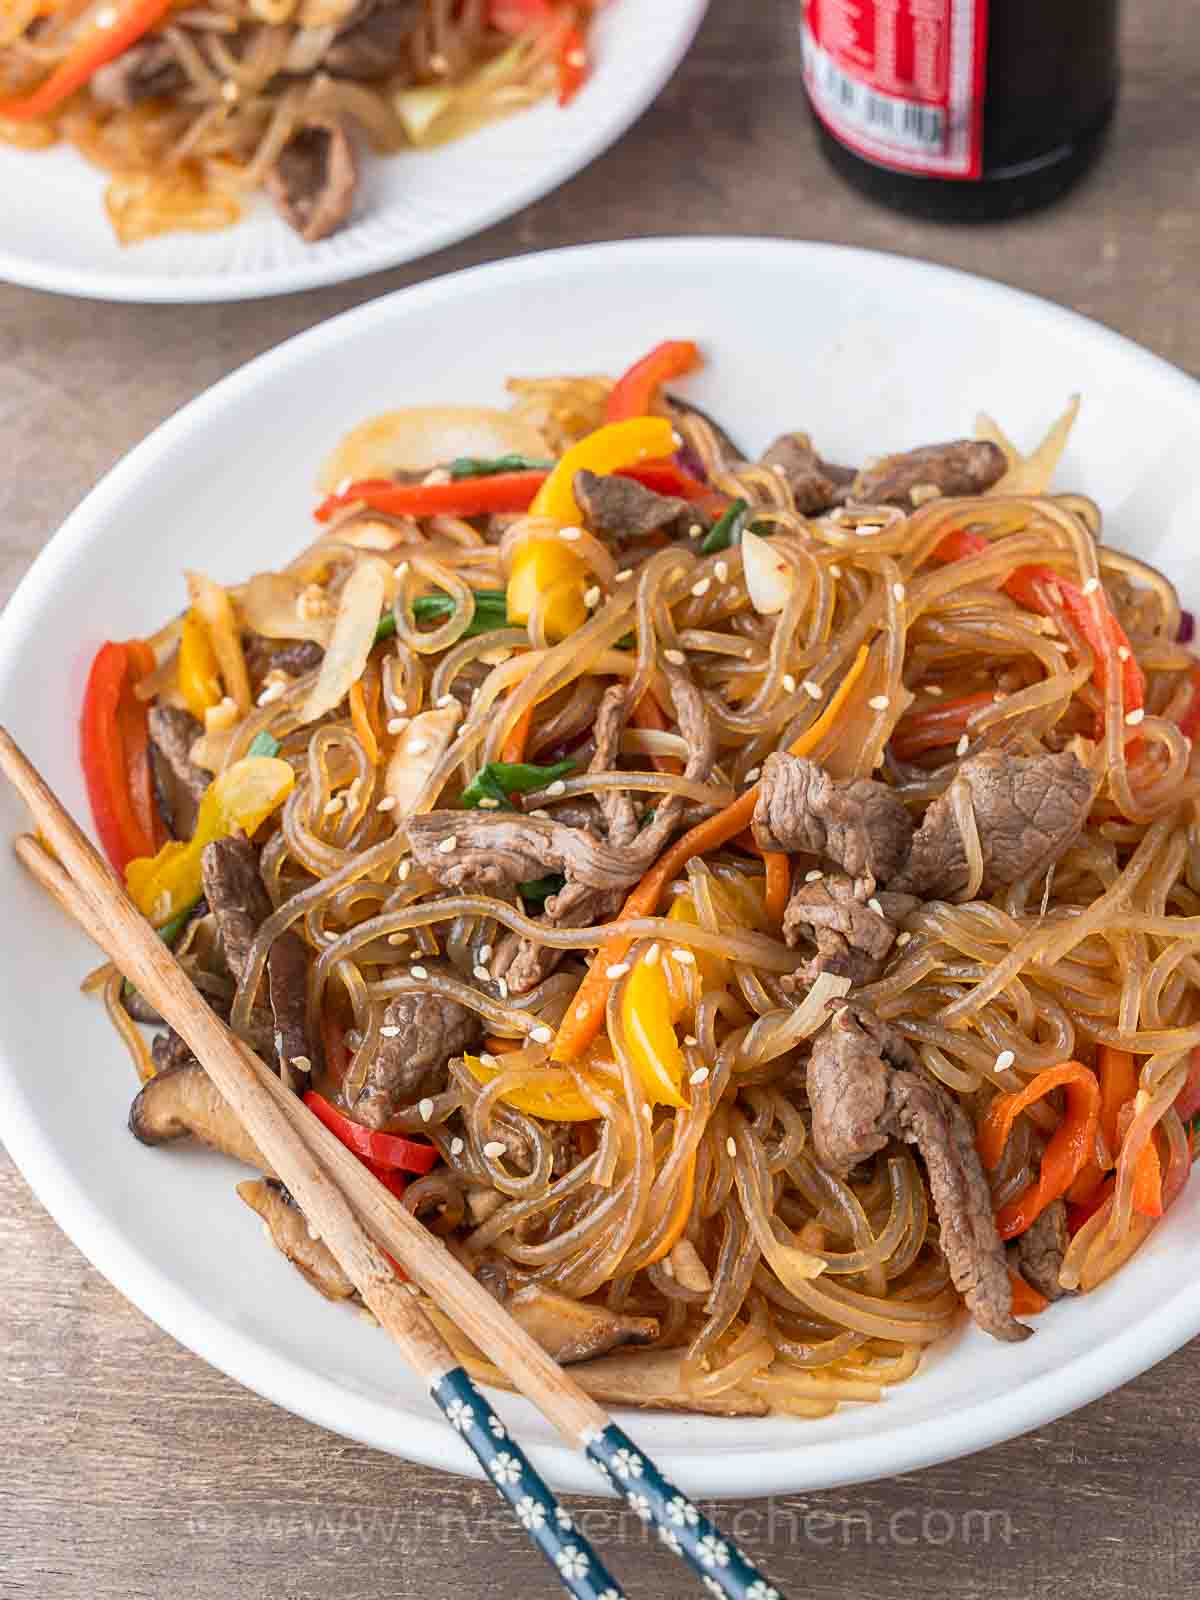 Korean noodles with beef and vegetables.